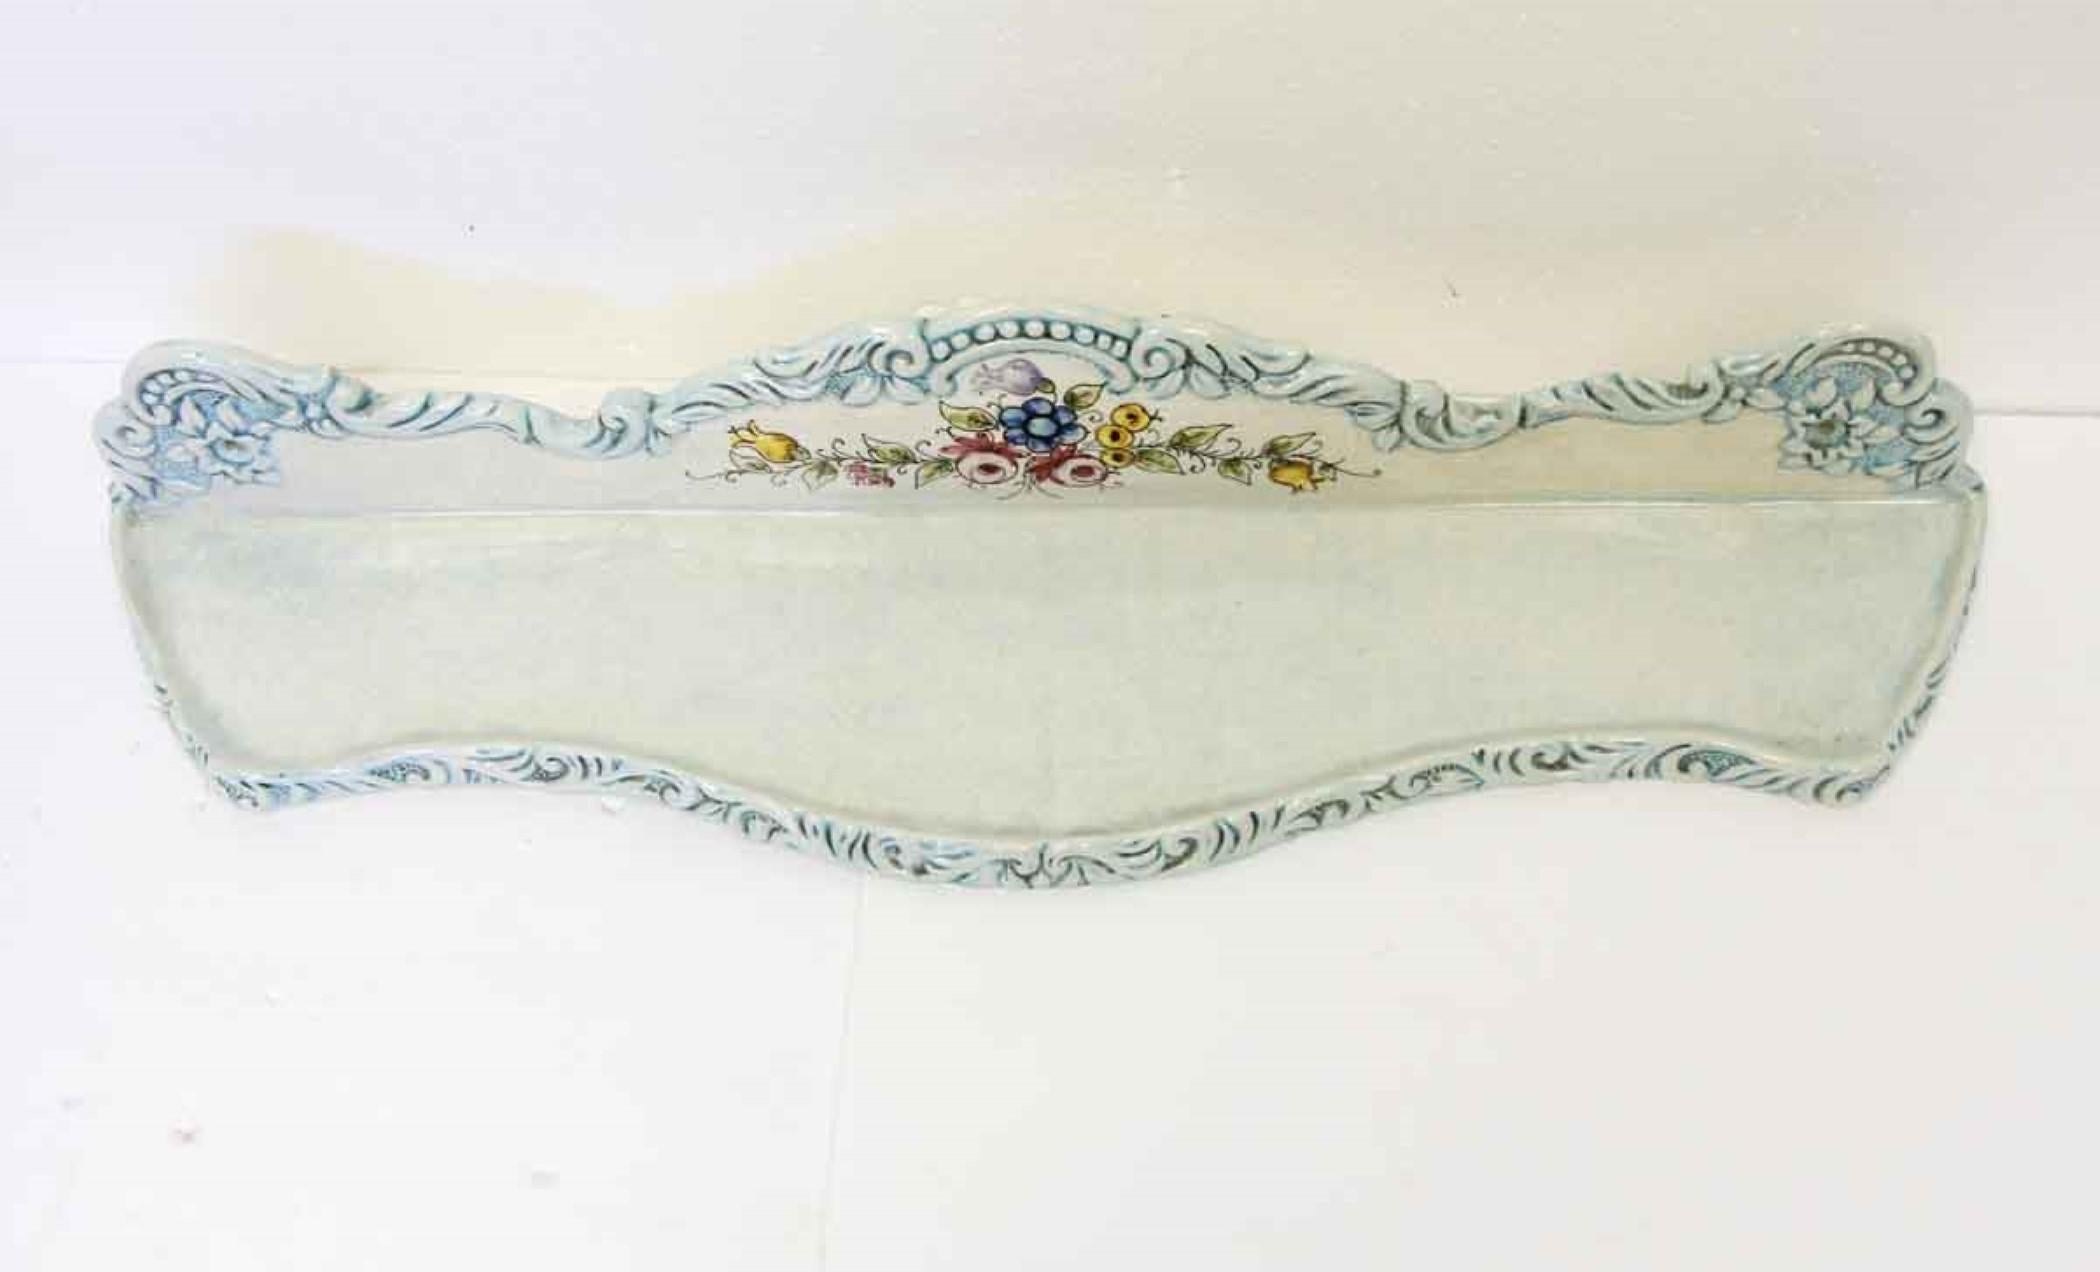 1960s blue and white decorative porcelain wall shelf featuring a crackled glaze and brightly colorful floral design. This can be seen at our 400 Gilligan St location in Scranton, PA.